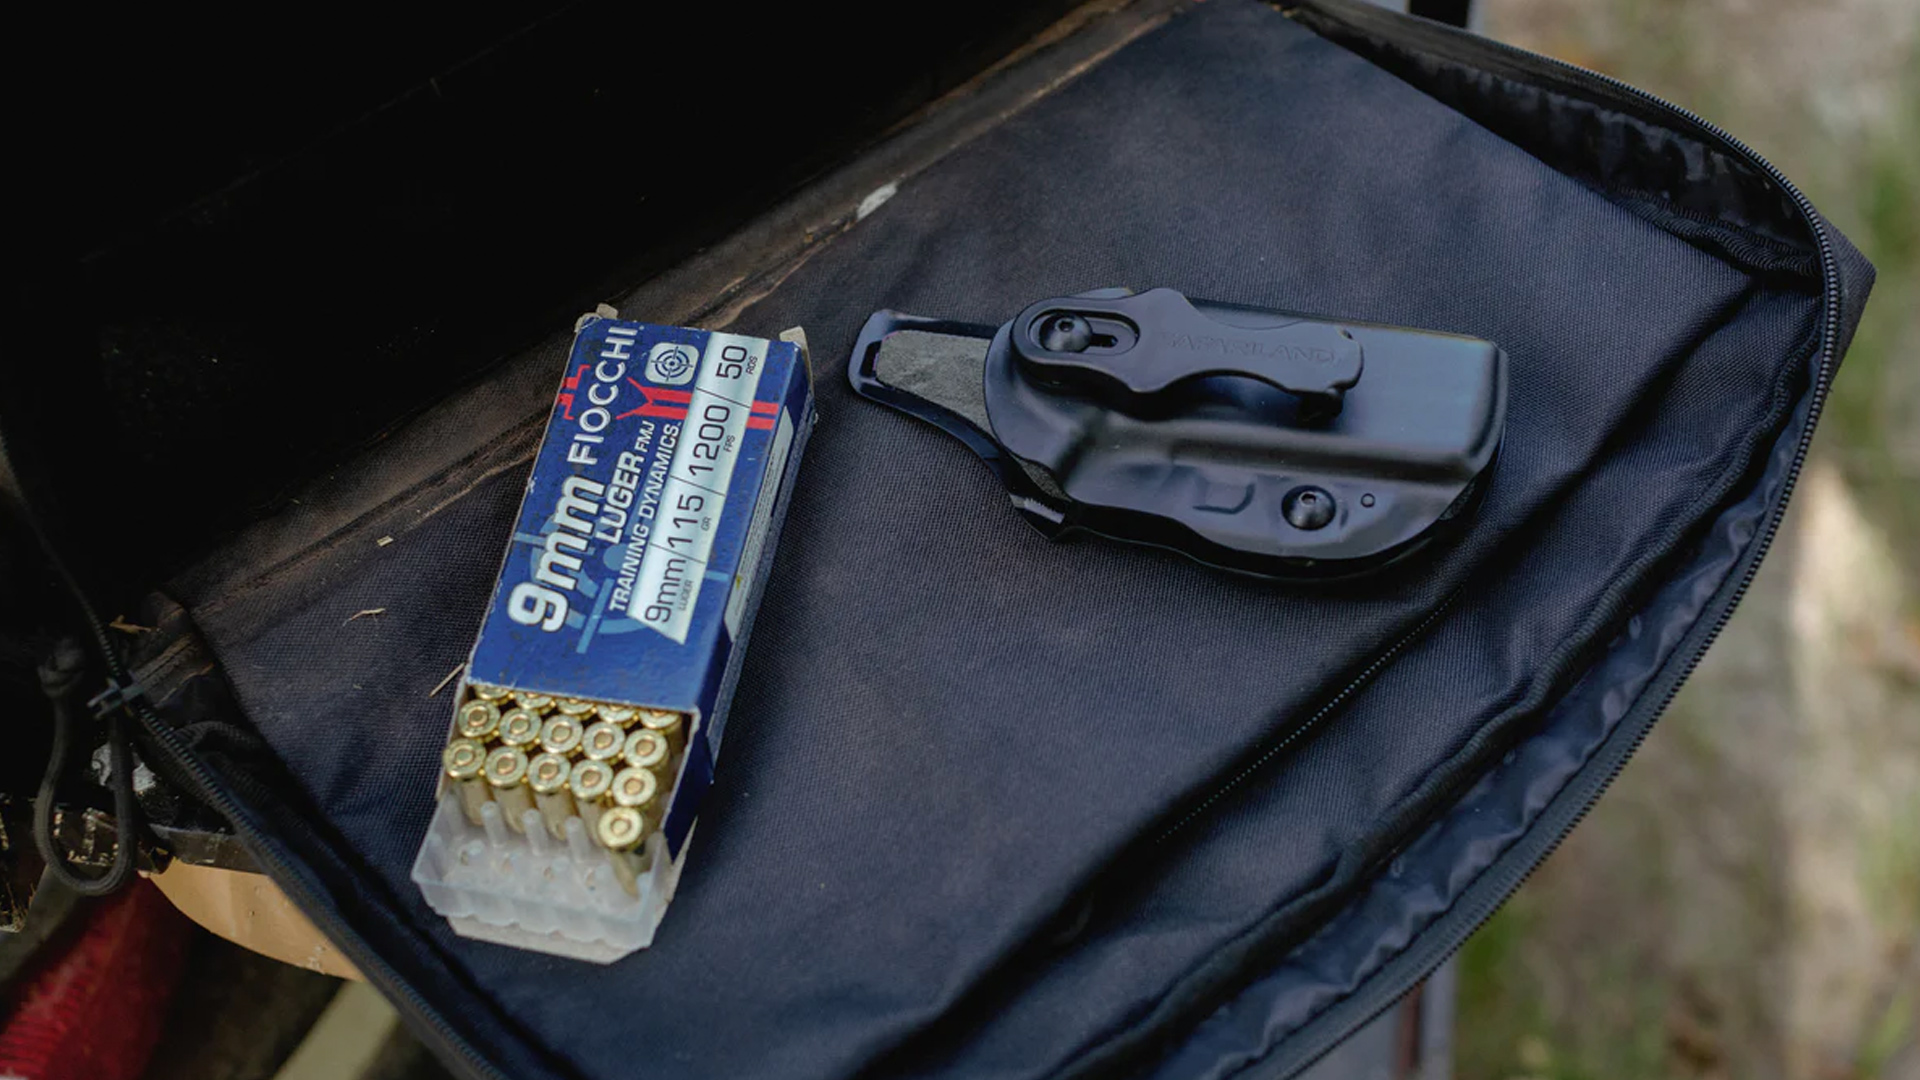 Species Holster and Fiocchi ammo